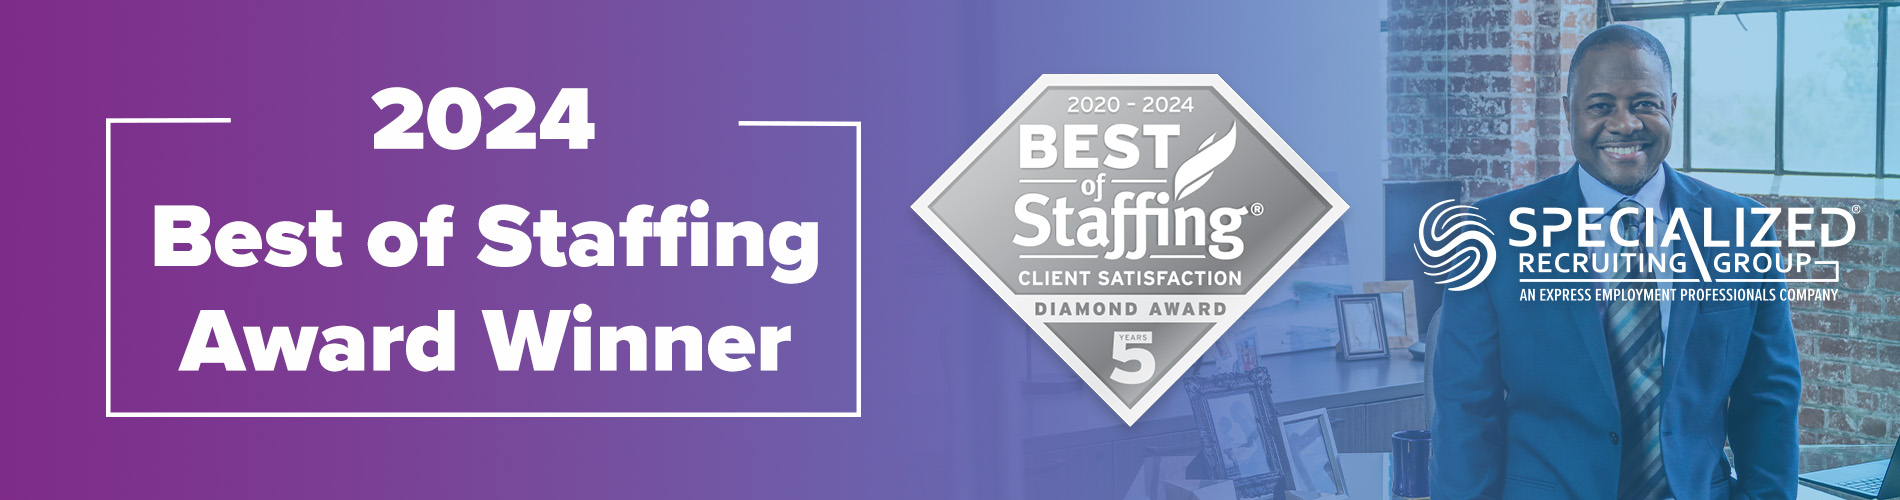 Best-of-Staffing-Client-Award-Home-Banner-2024-SRG